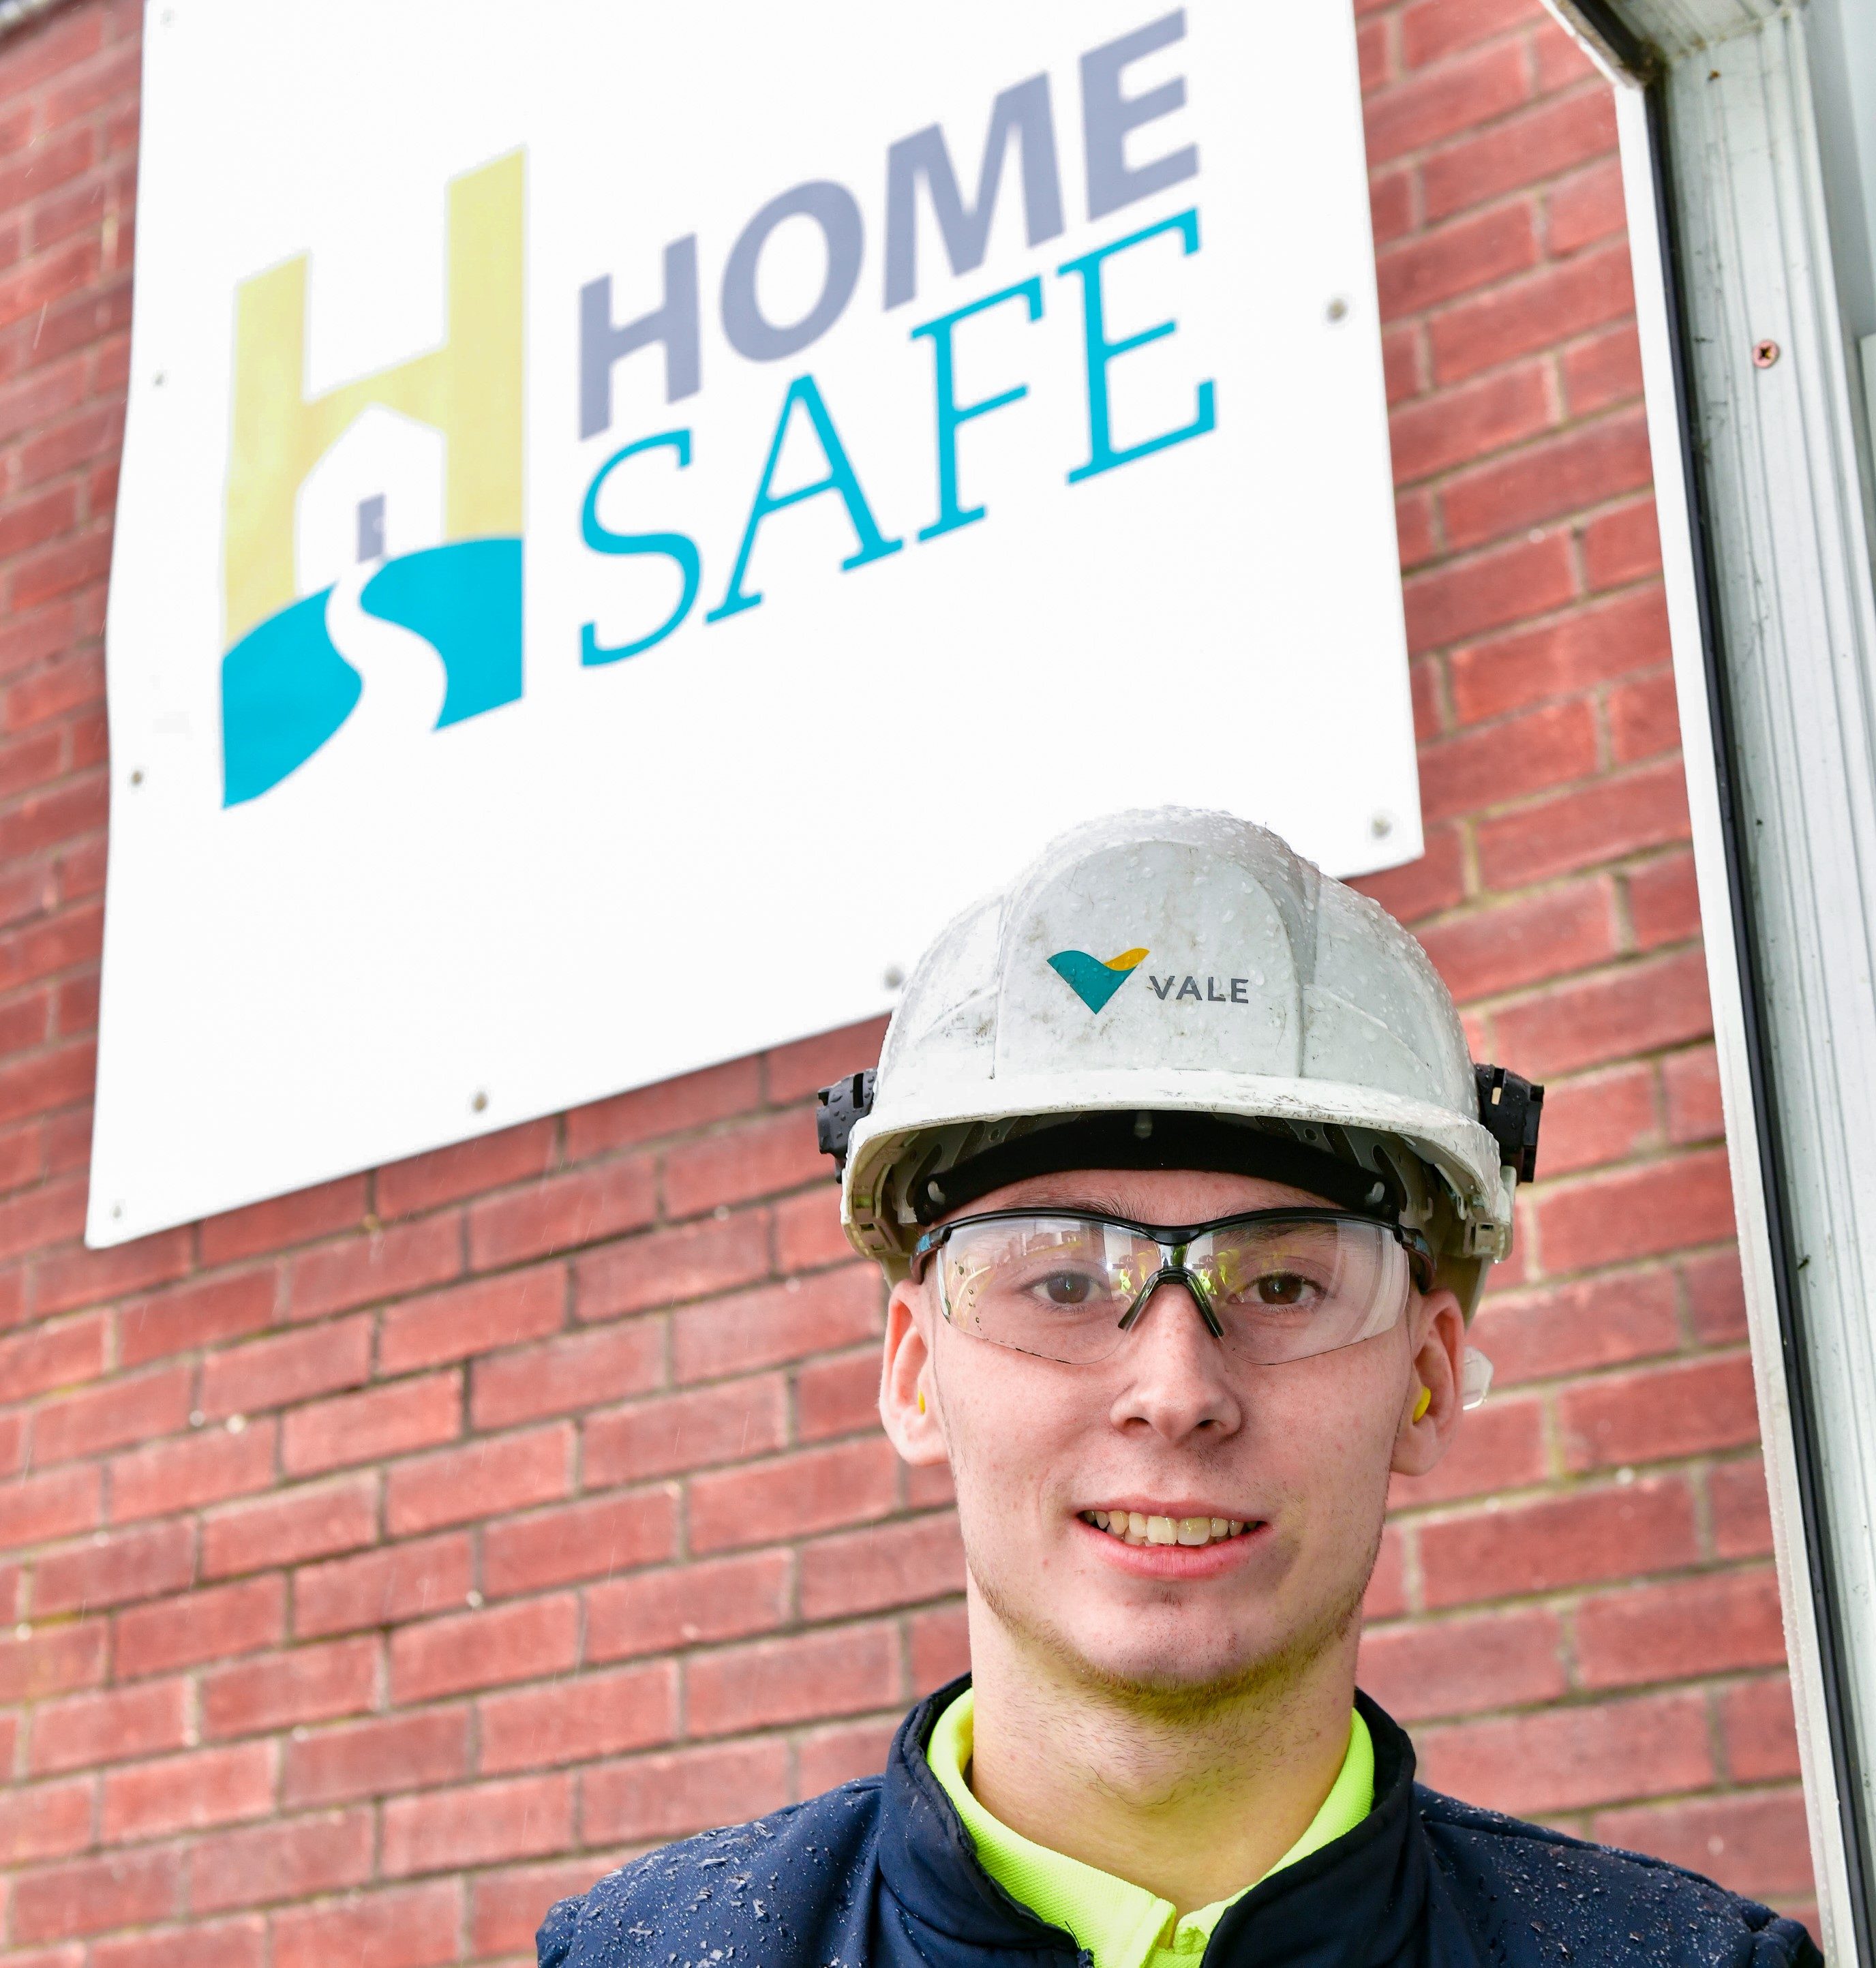 Vale's emploeey with goggles and helmet in front of a "home safe" poster